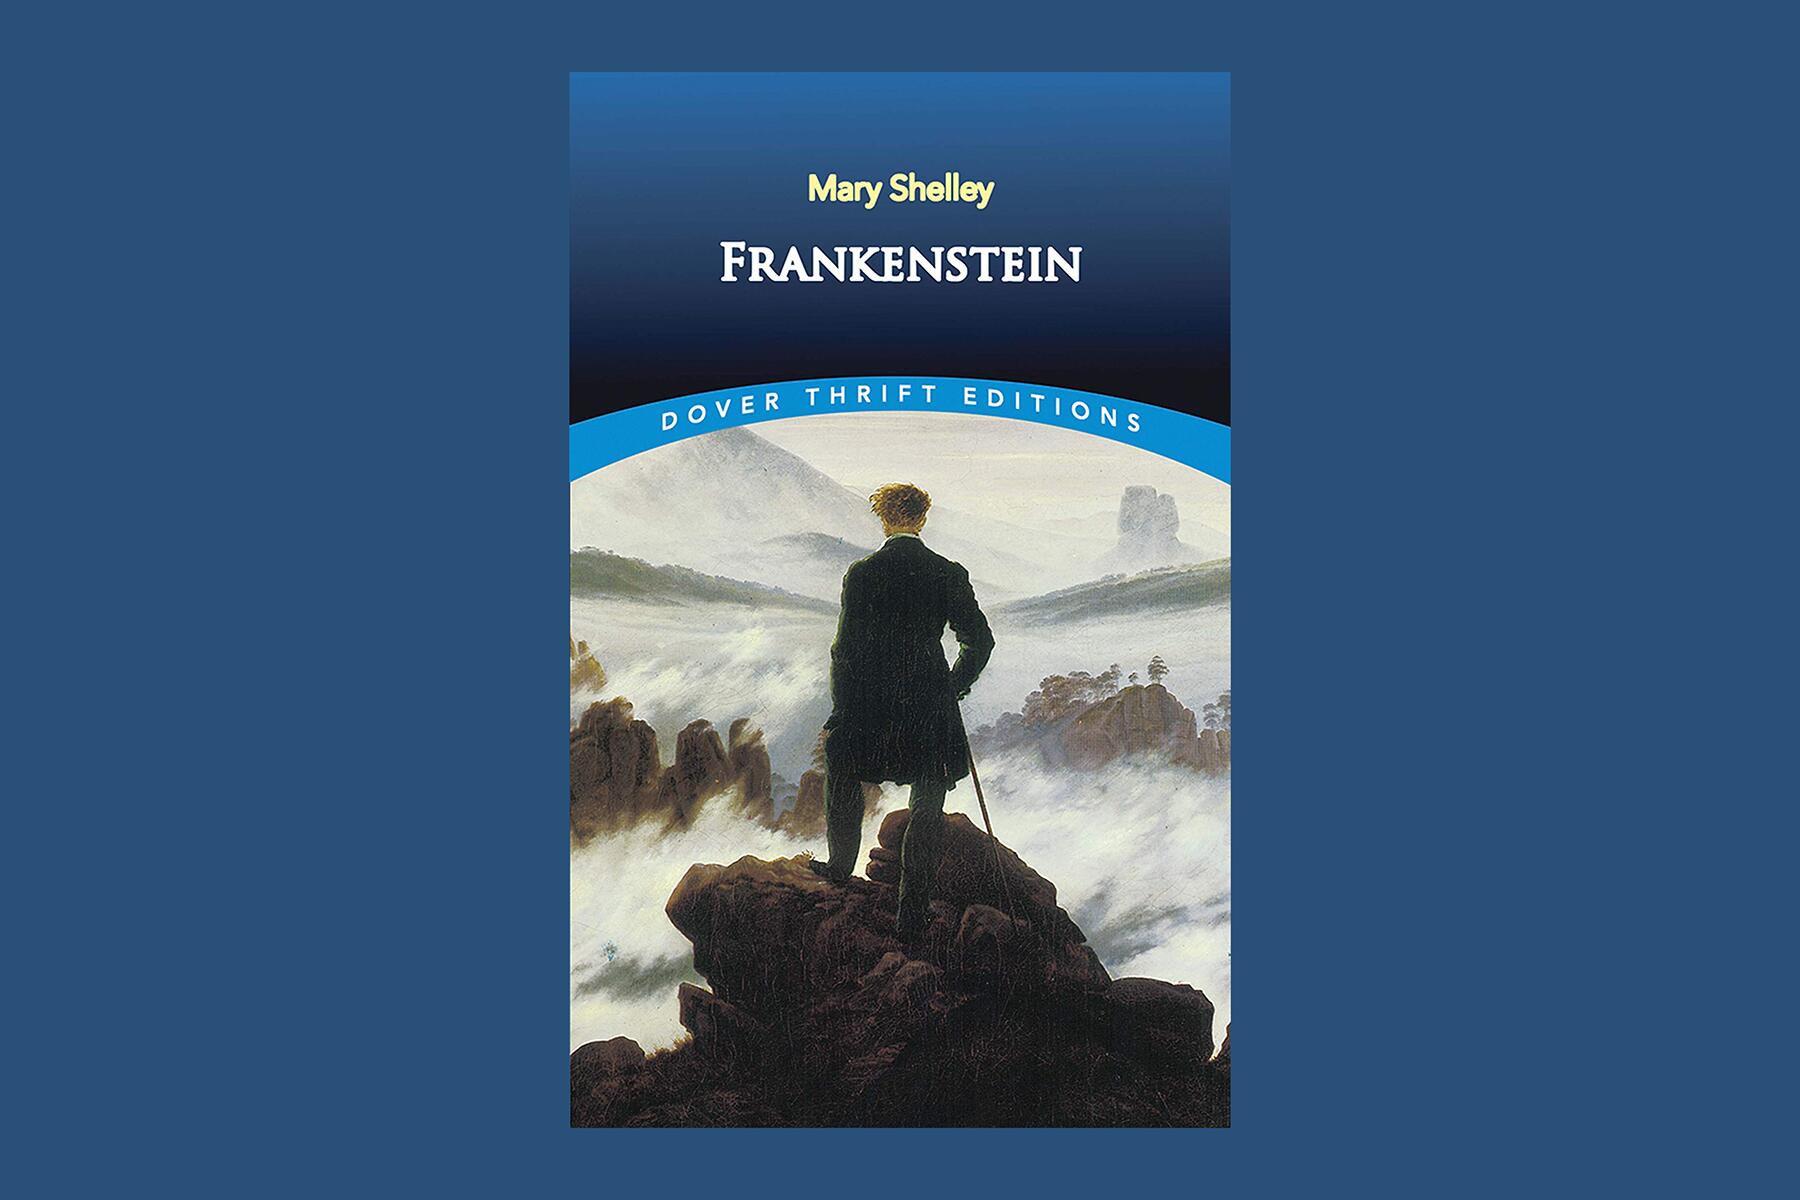 <a href='https://www.fodors.com/world/europe/england/experiences/news/photos/what-tea-to-drink-with-british-classic-literature#'>From &quot;Teas to Pair With Your Favorite British Classics: 'Frankenstein' by Mary Shelley&quot;</a>